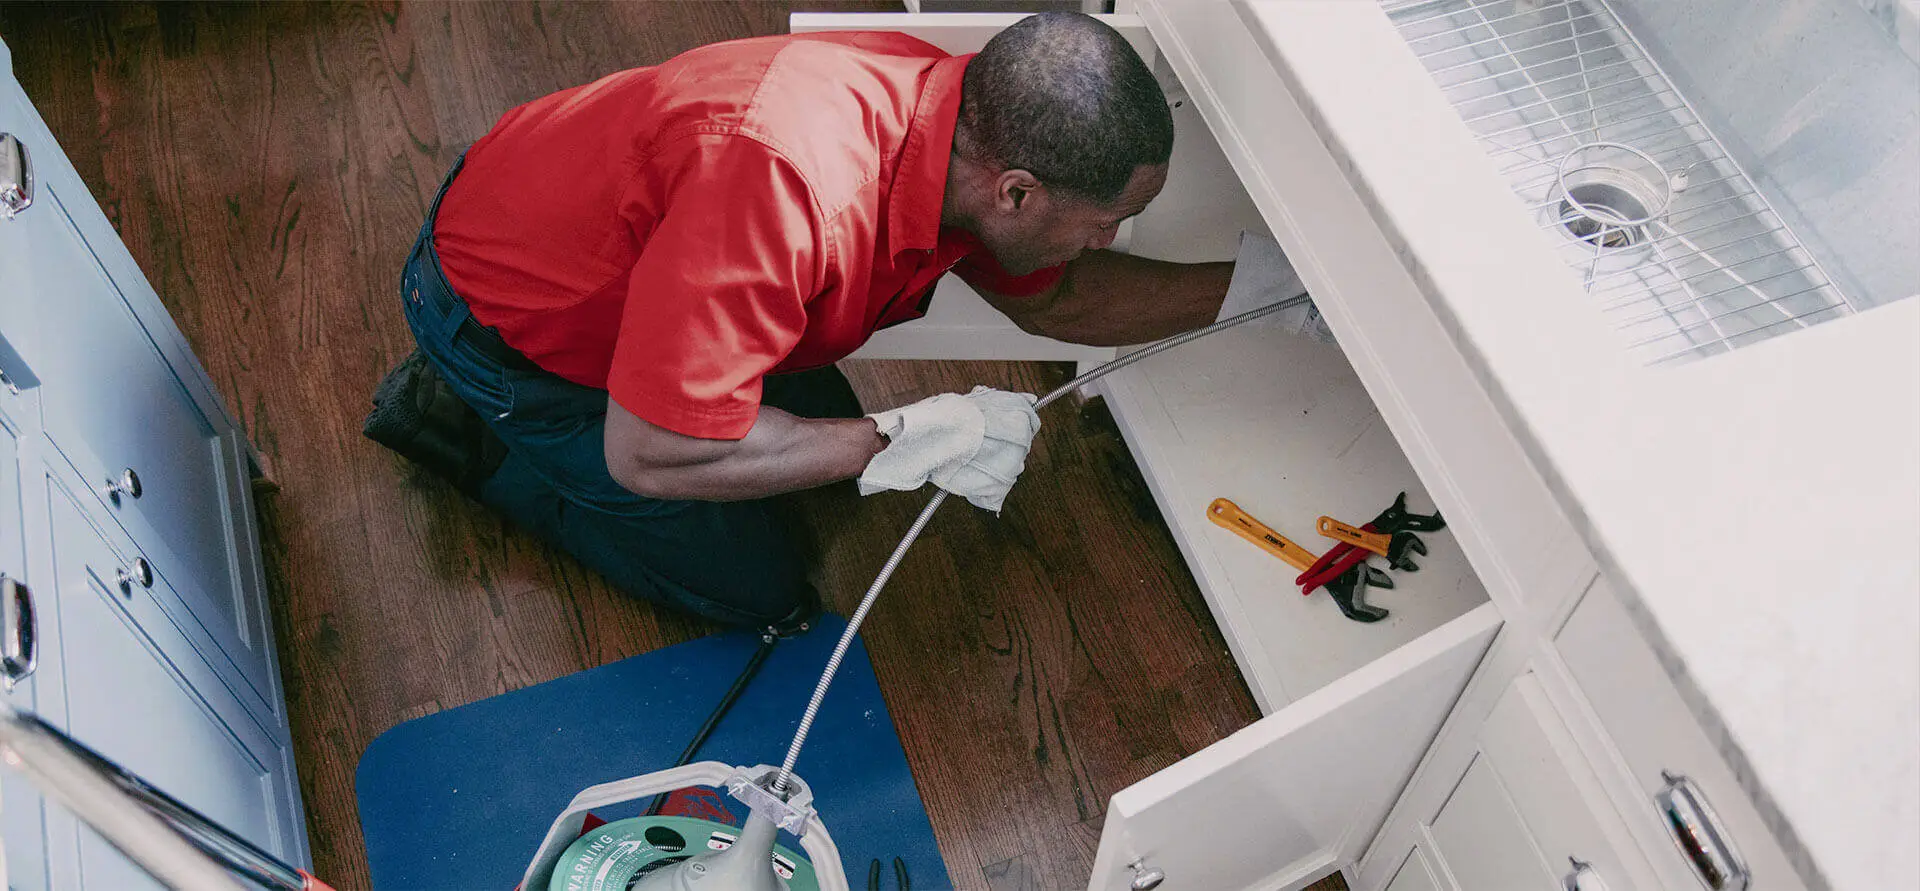 Mr. Rooter plumber using a snake to clear a kitchen sink drain